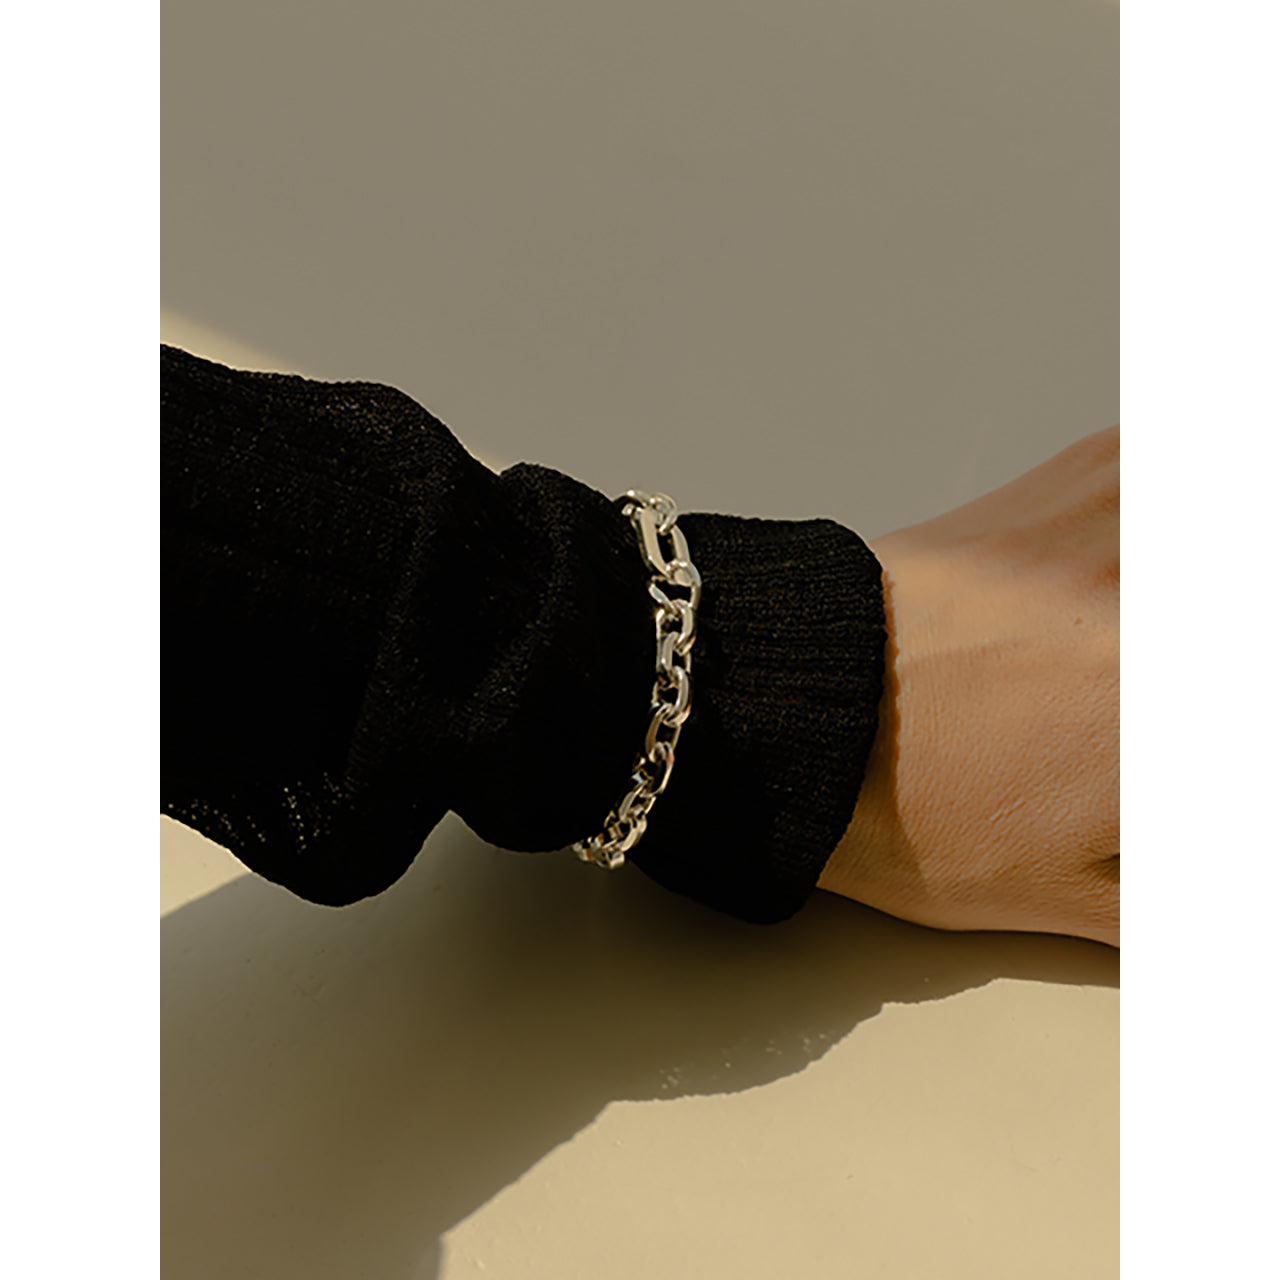 This chunky chain bracelet is a classic accessory that will never go out of style, beloved by jewelry enthusiasts everywhere. T